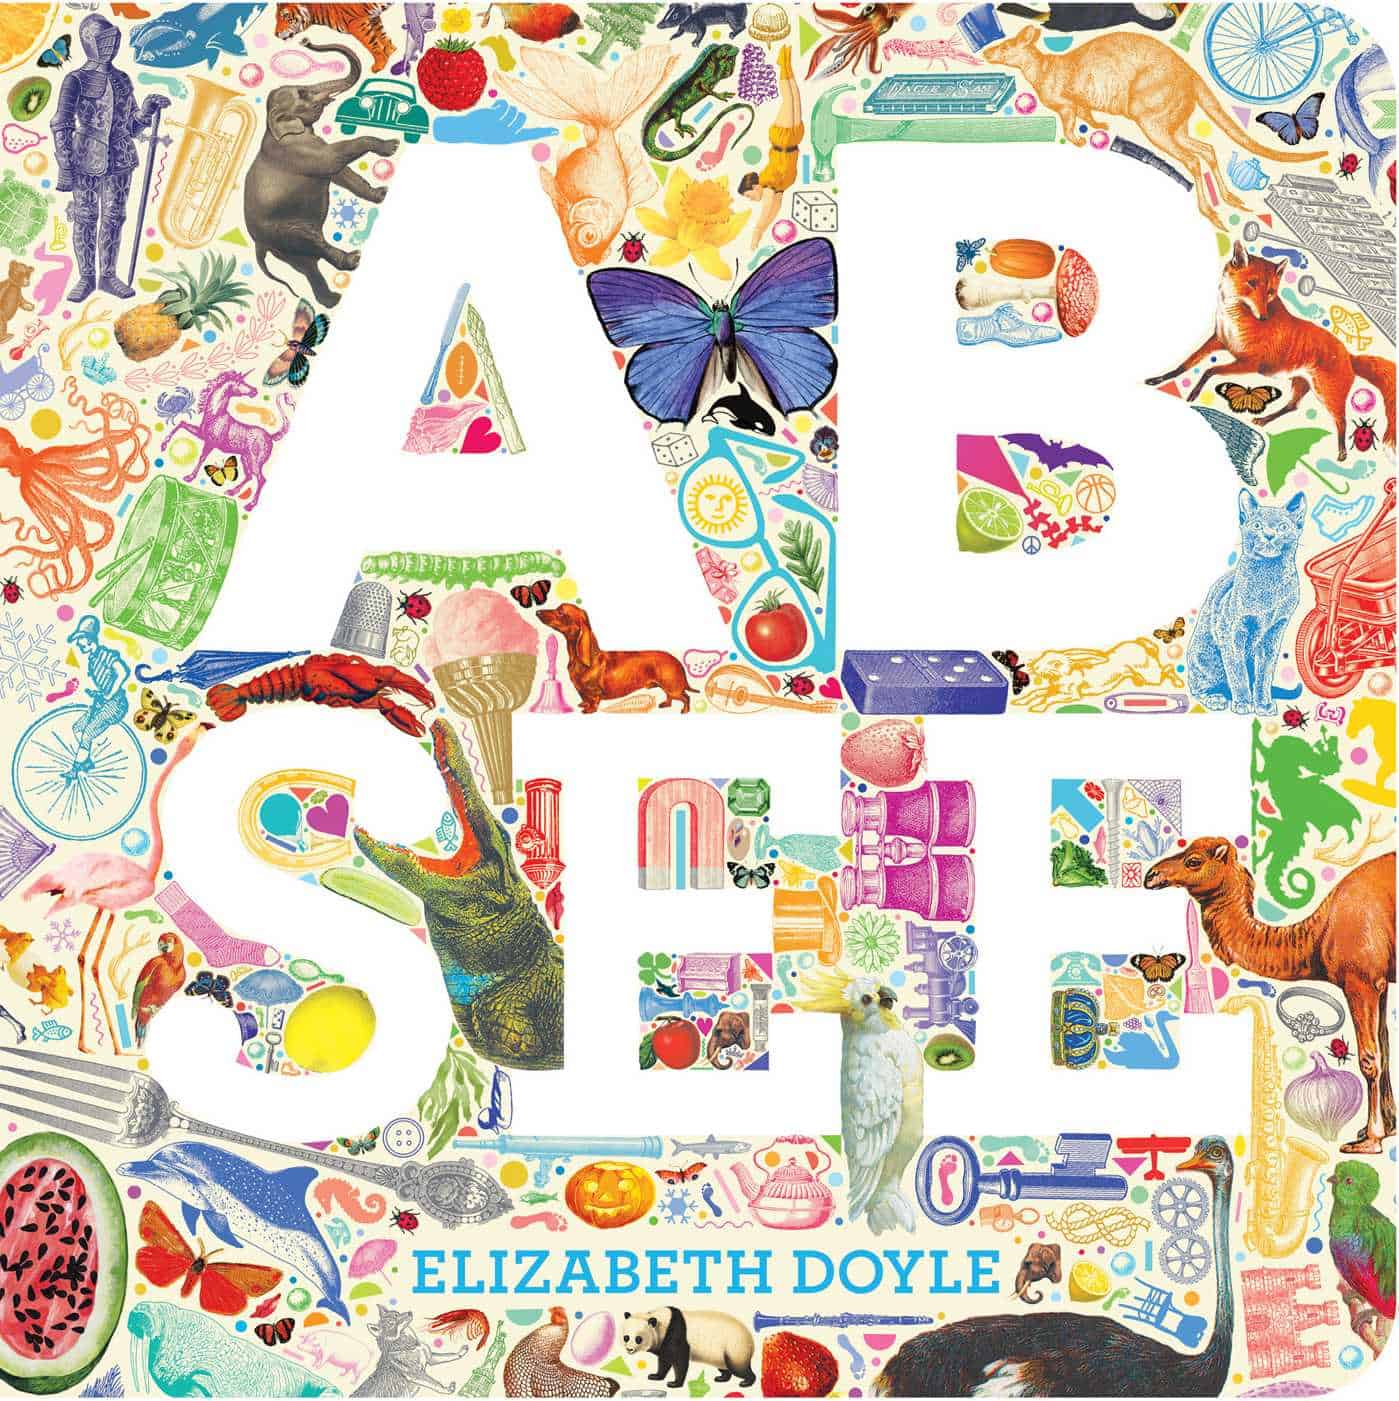 Books For Toddlers: Best Books for 2-3 year olds - A B SEE by Elizabeth Doyle